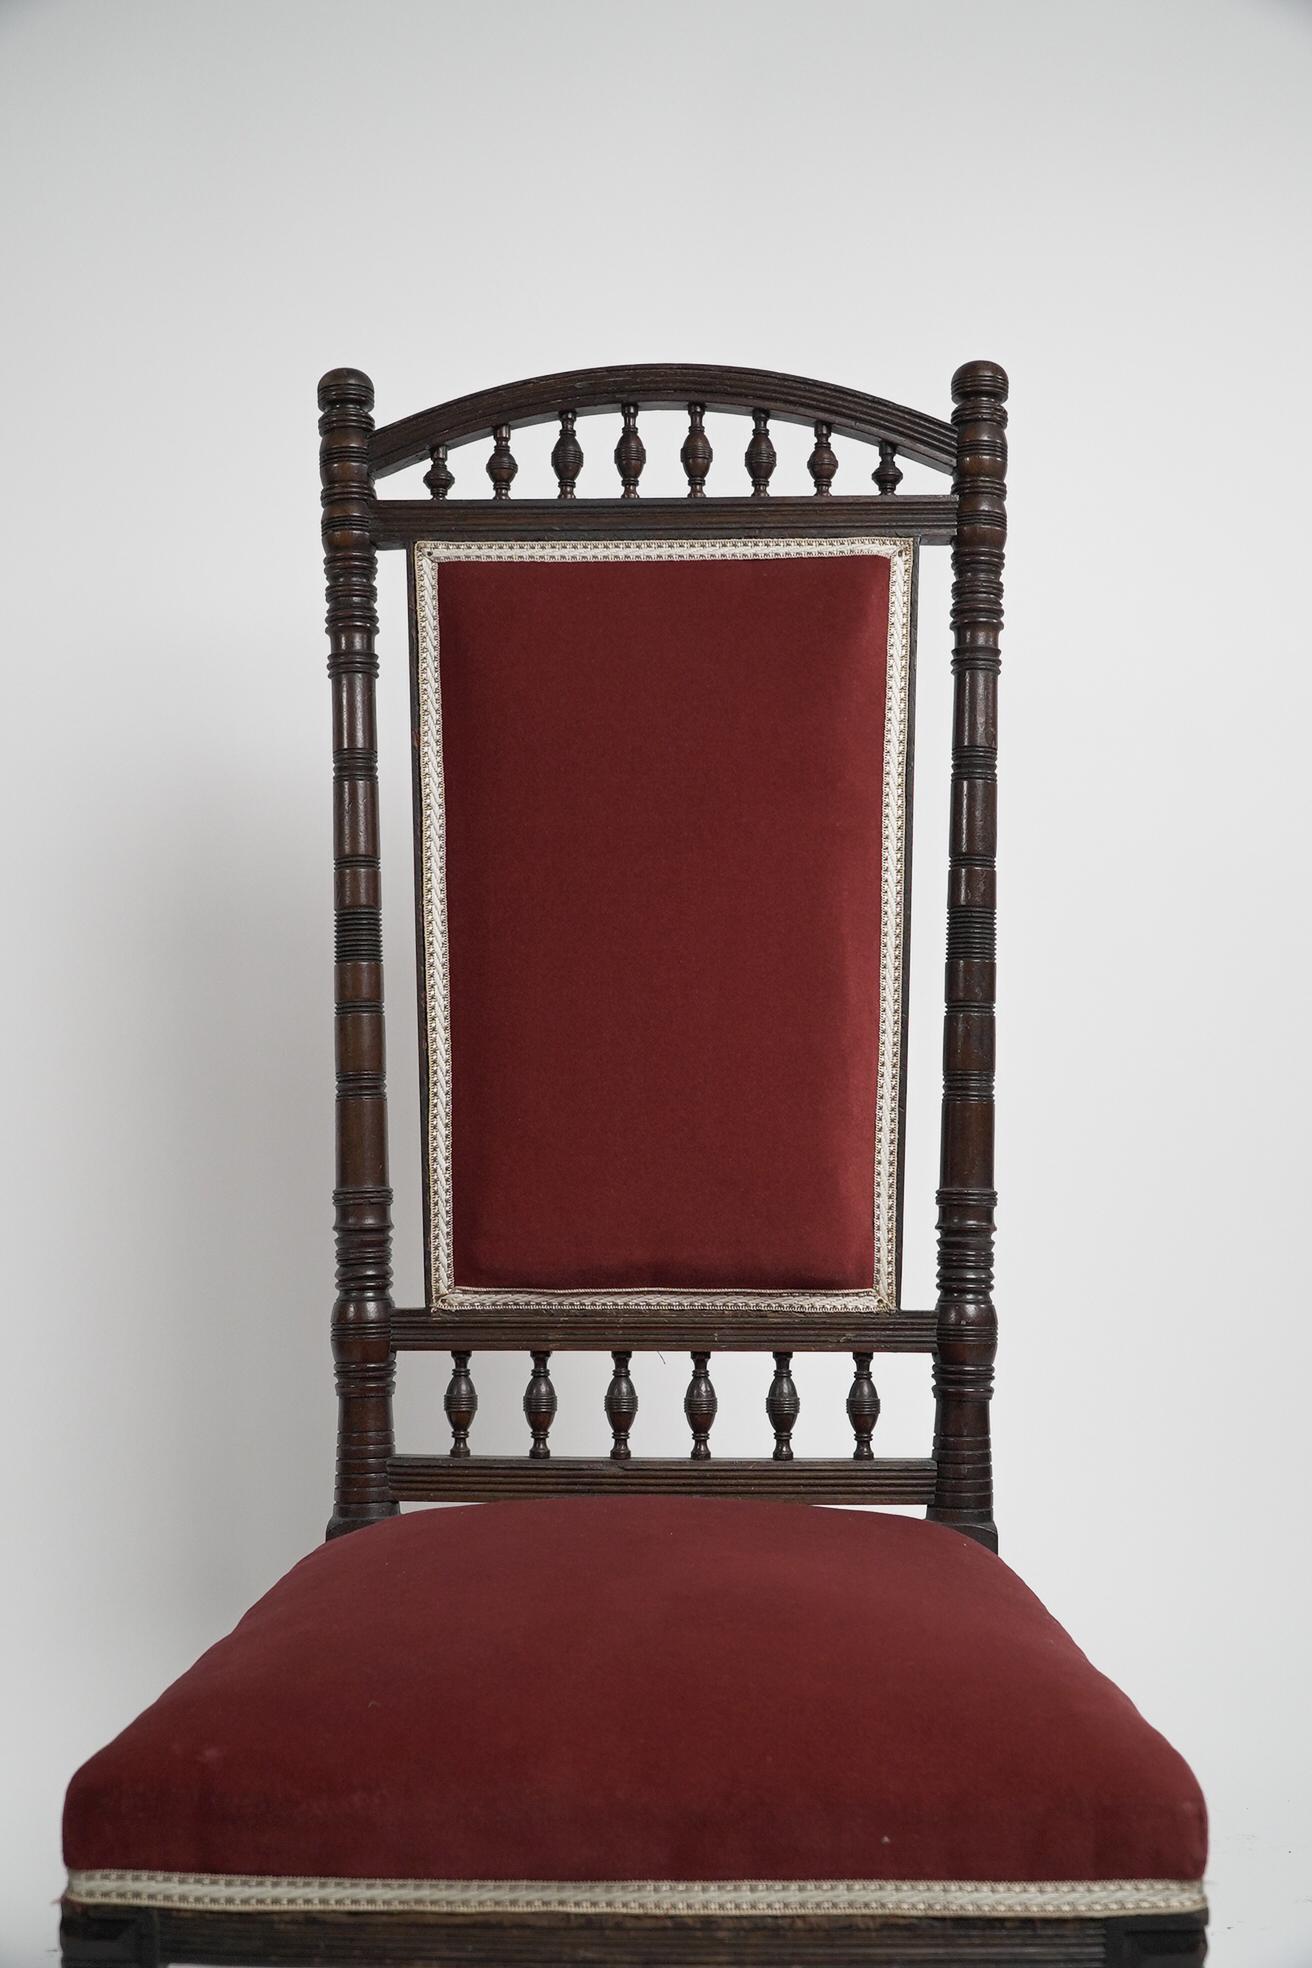 Late 19th Century Thomas Edward Collcutt for Collinson & Lock. Aesthetic Movement high back chair. For Sale